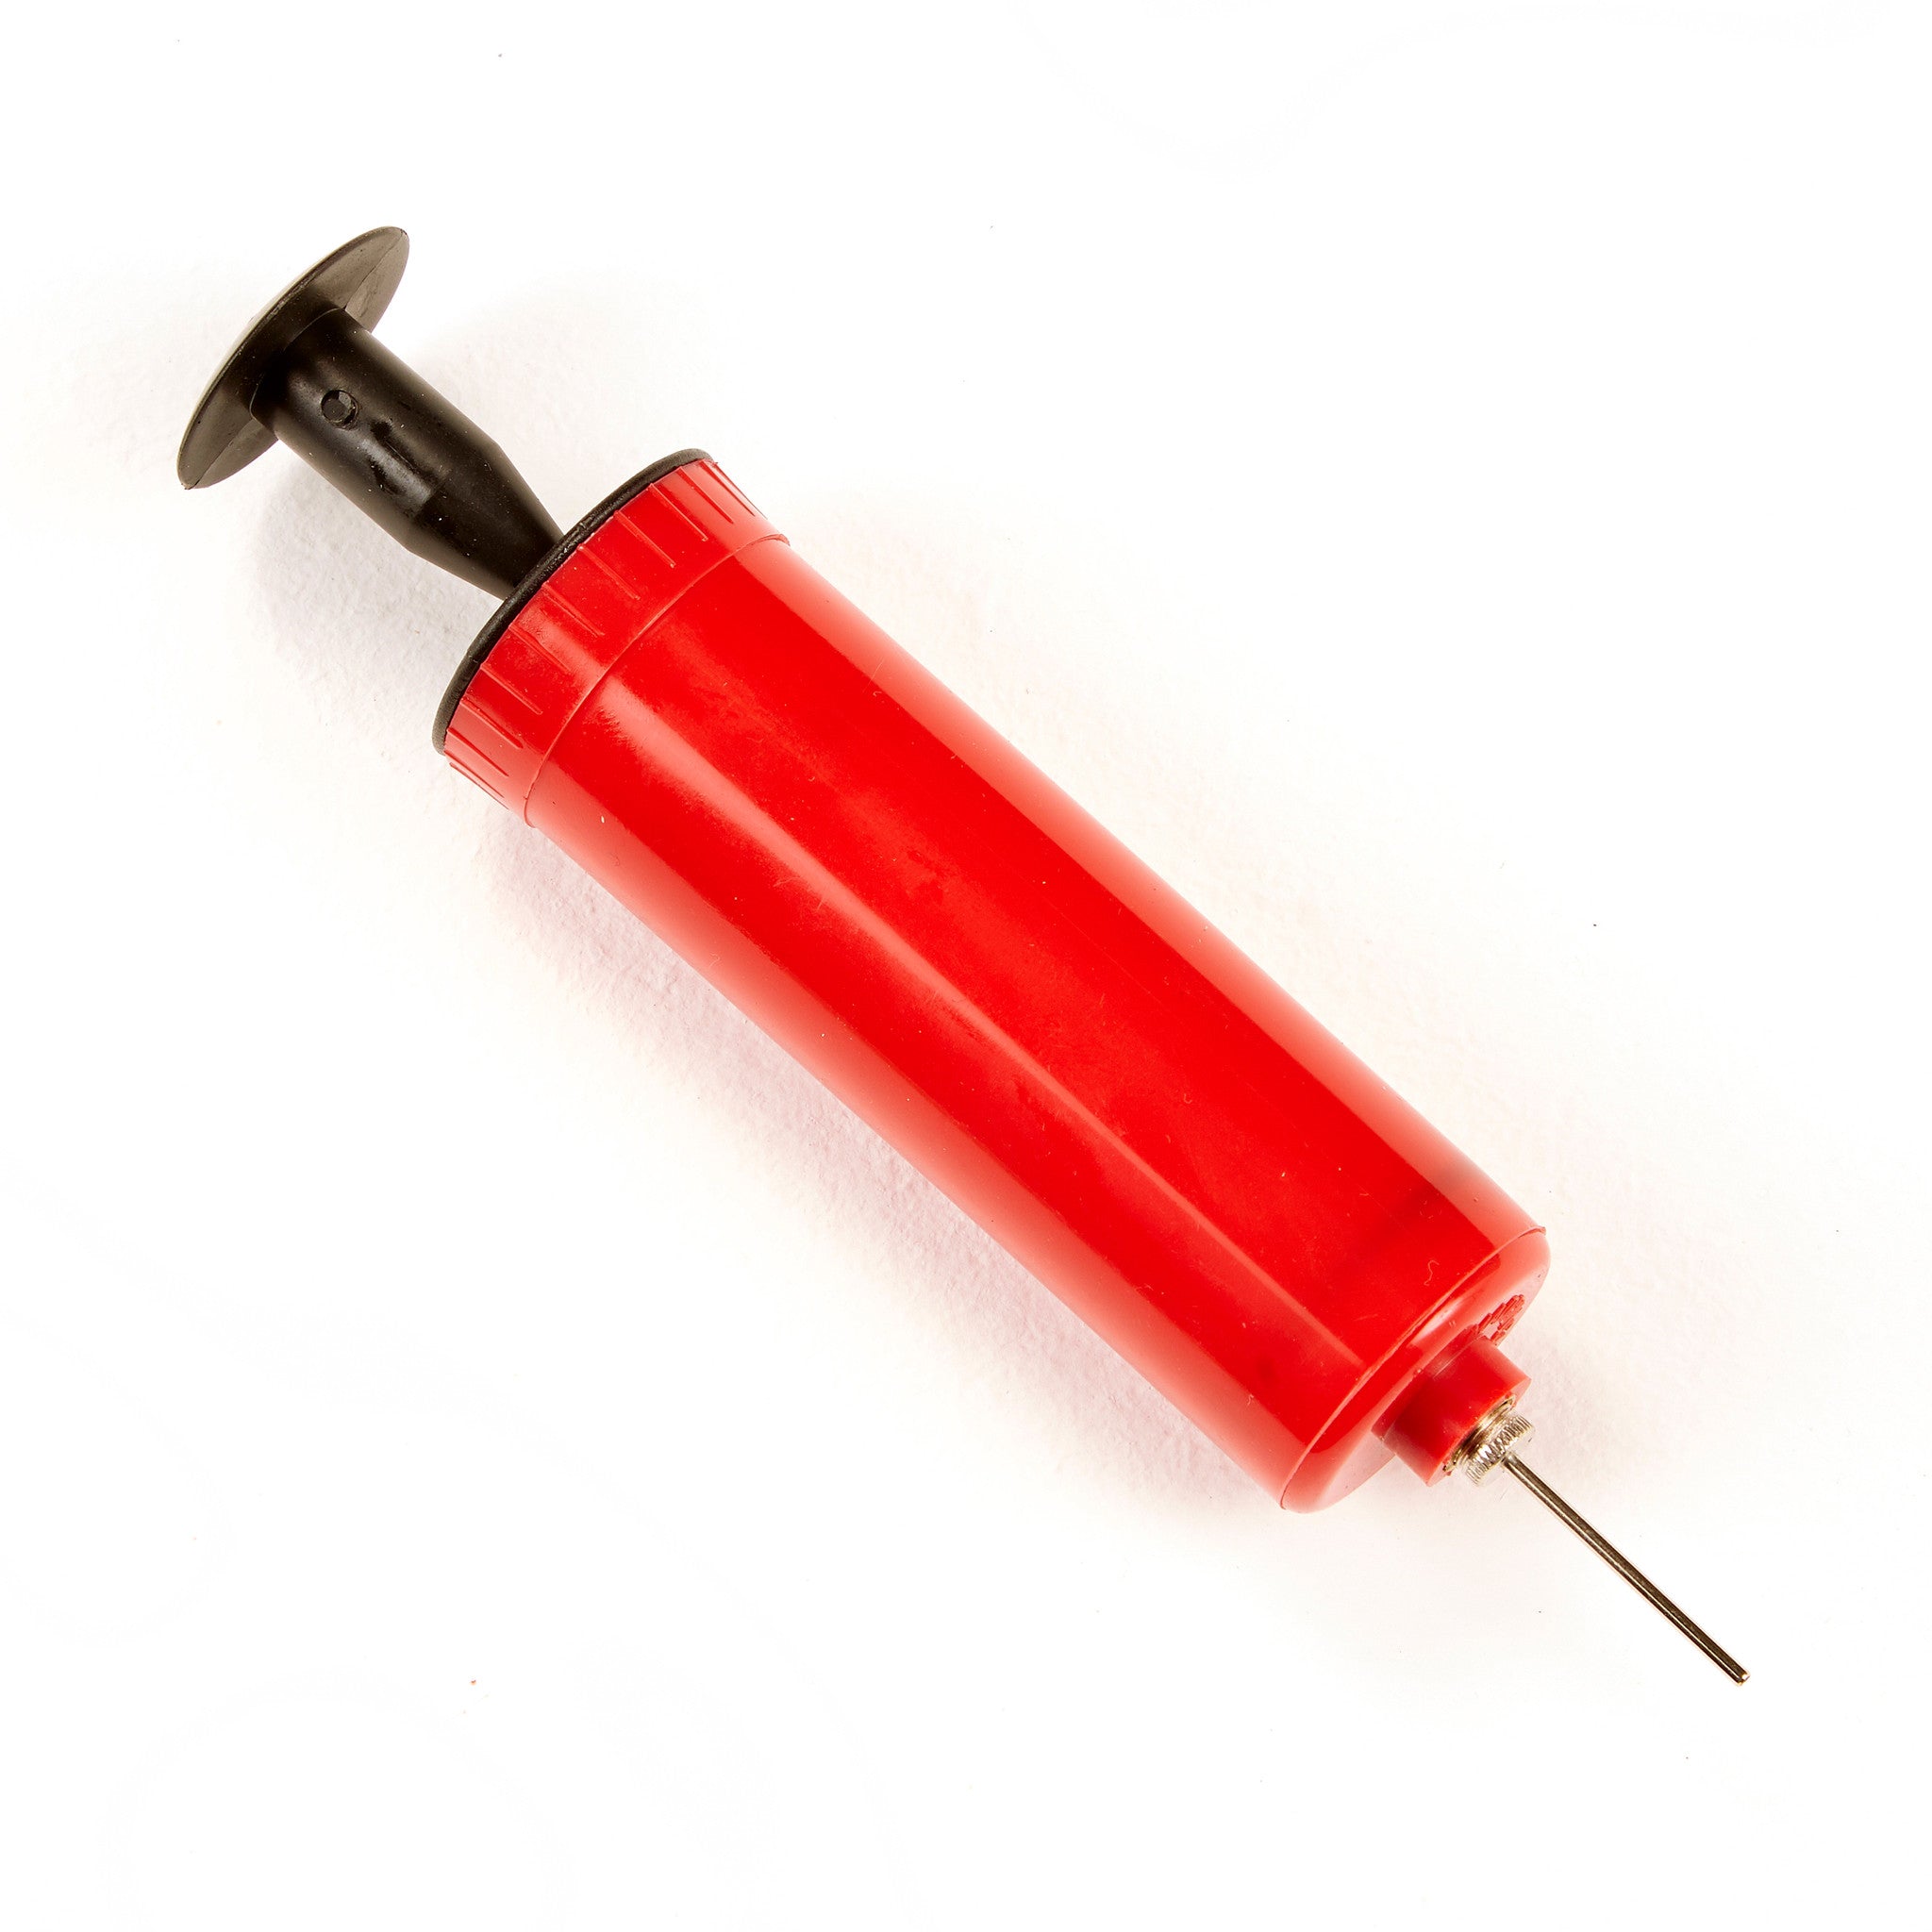 Red Needle Pump for Sports Ball inflation